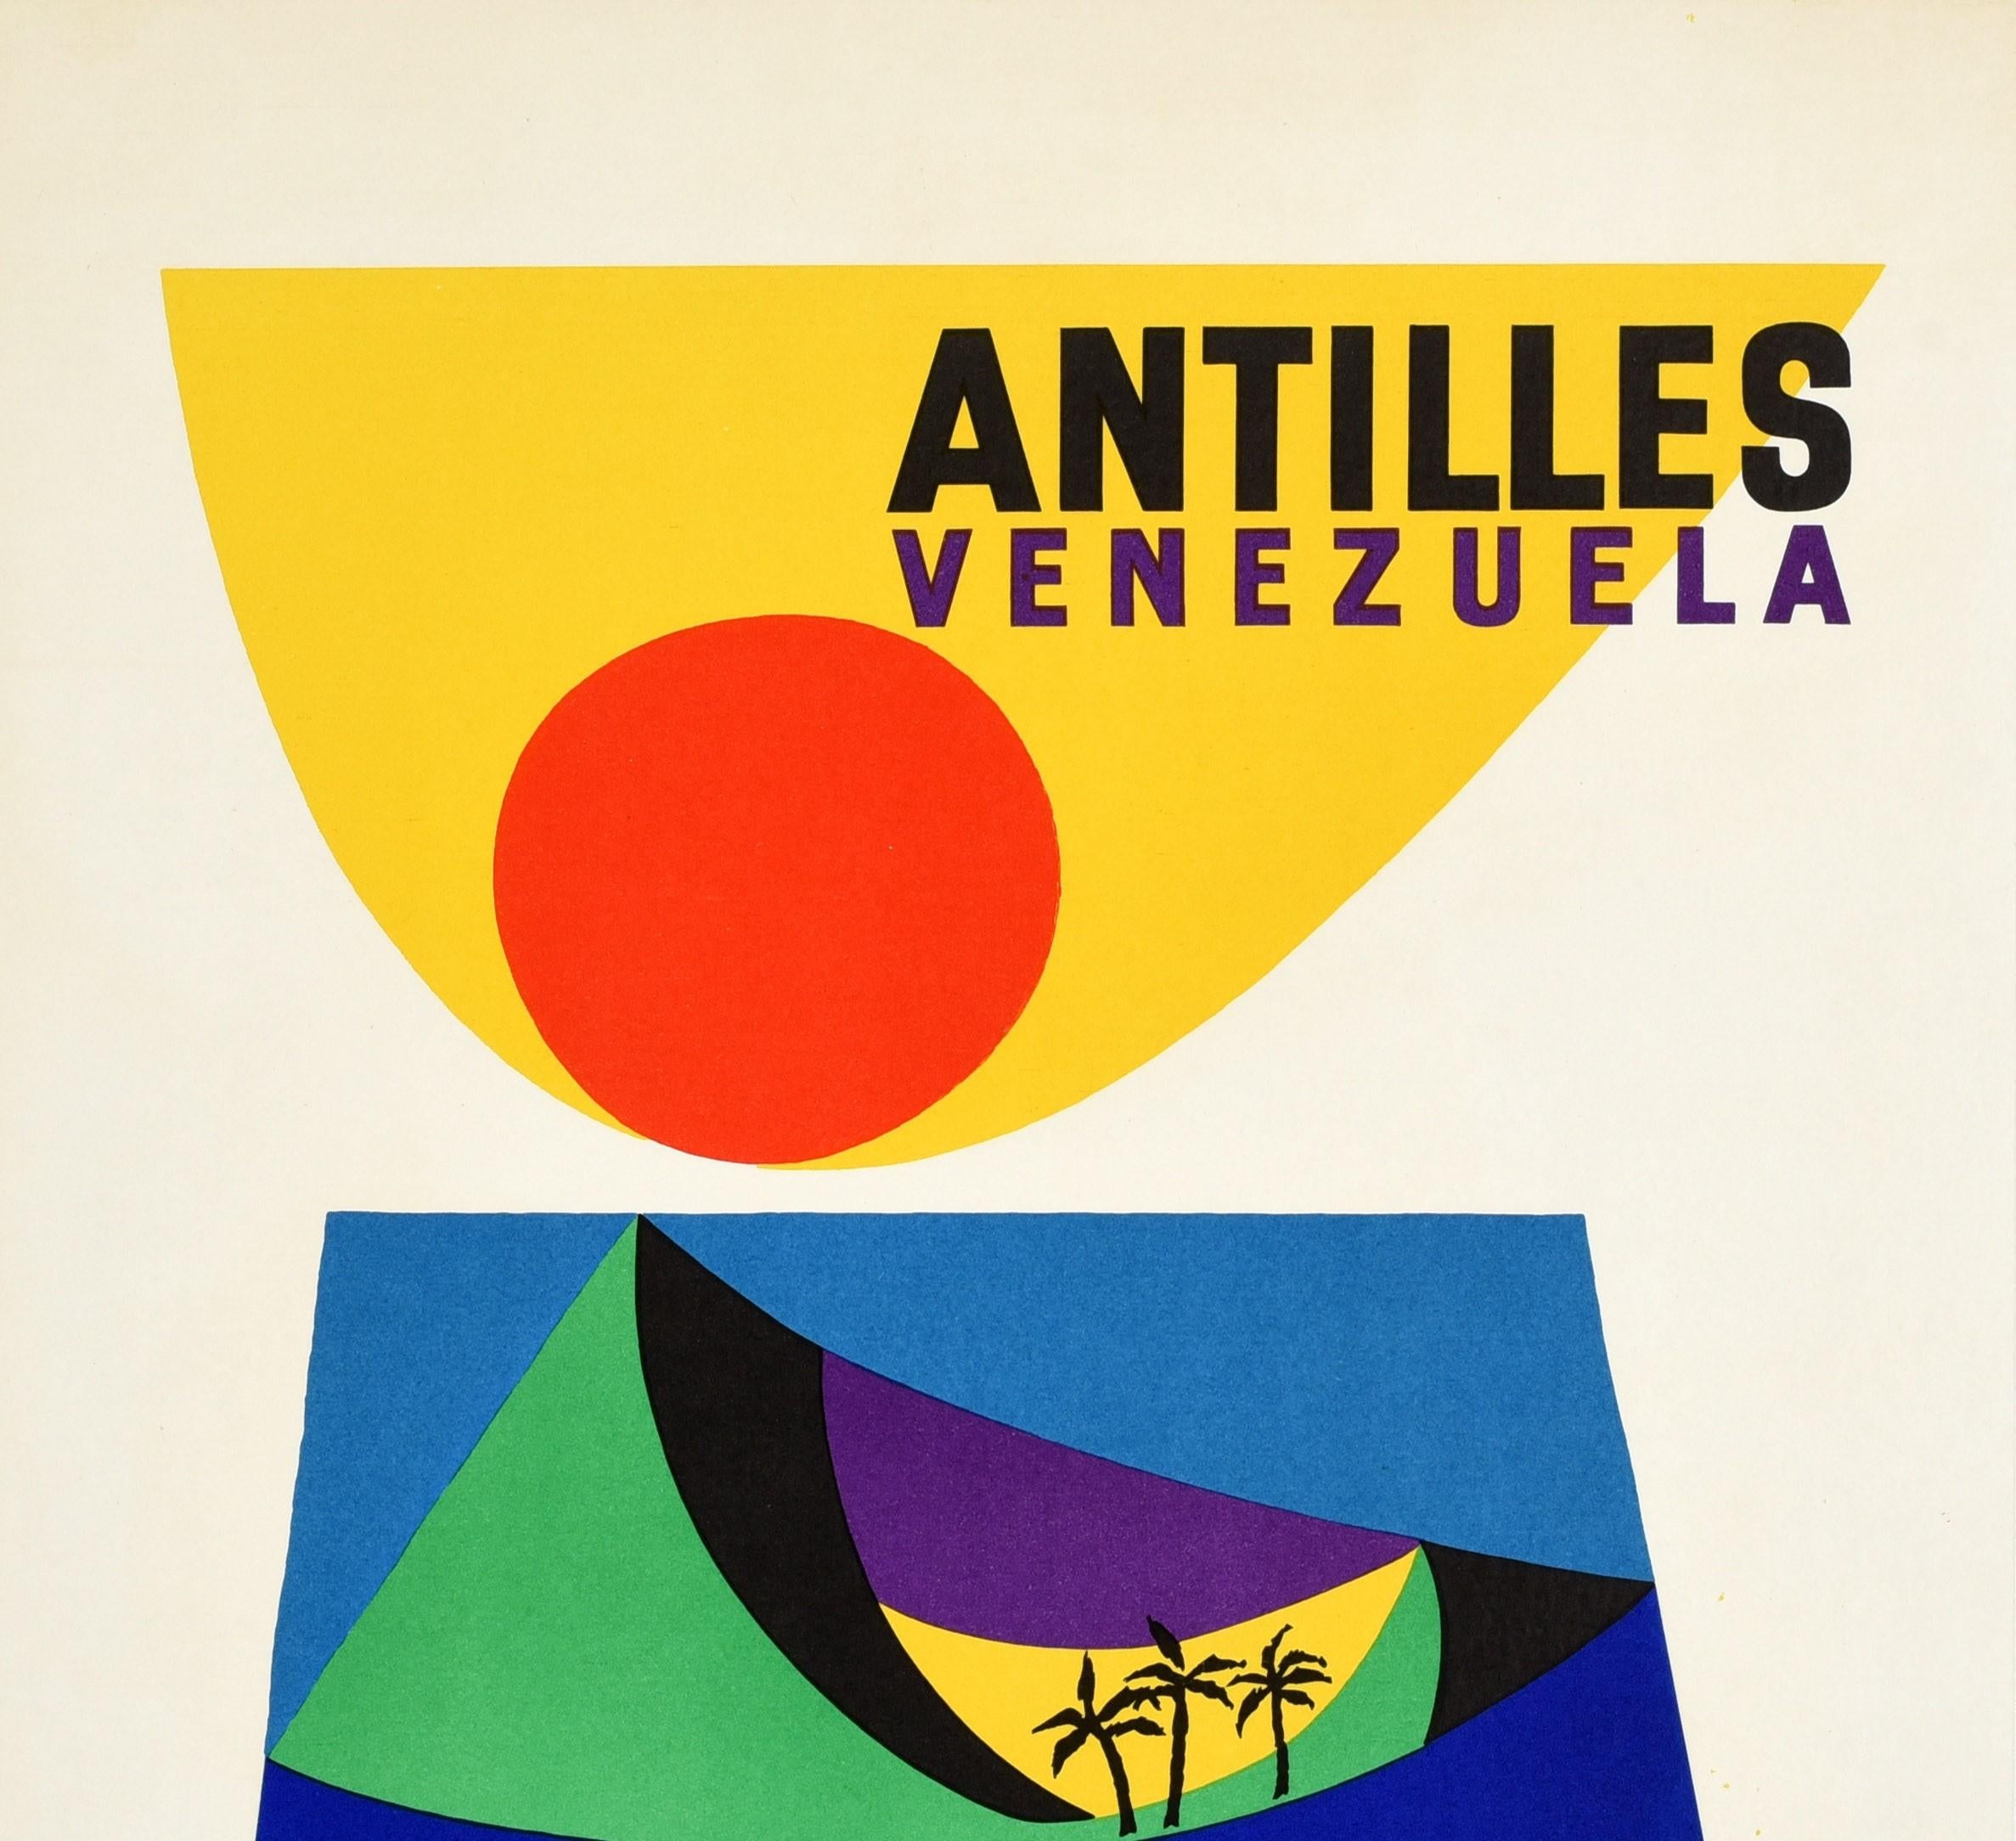 Original vintage travel poster for Antilles Venezuela issued by the Compagnie Generale Transatlantique featuring a colourful mid-century design in shapes depicting the sun above palm trees on a sandy beach with green hills on an island against the